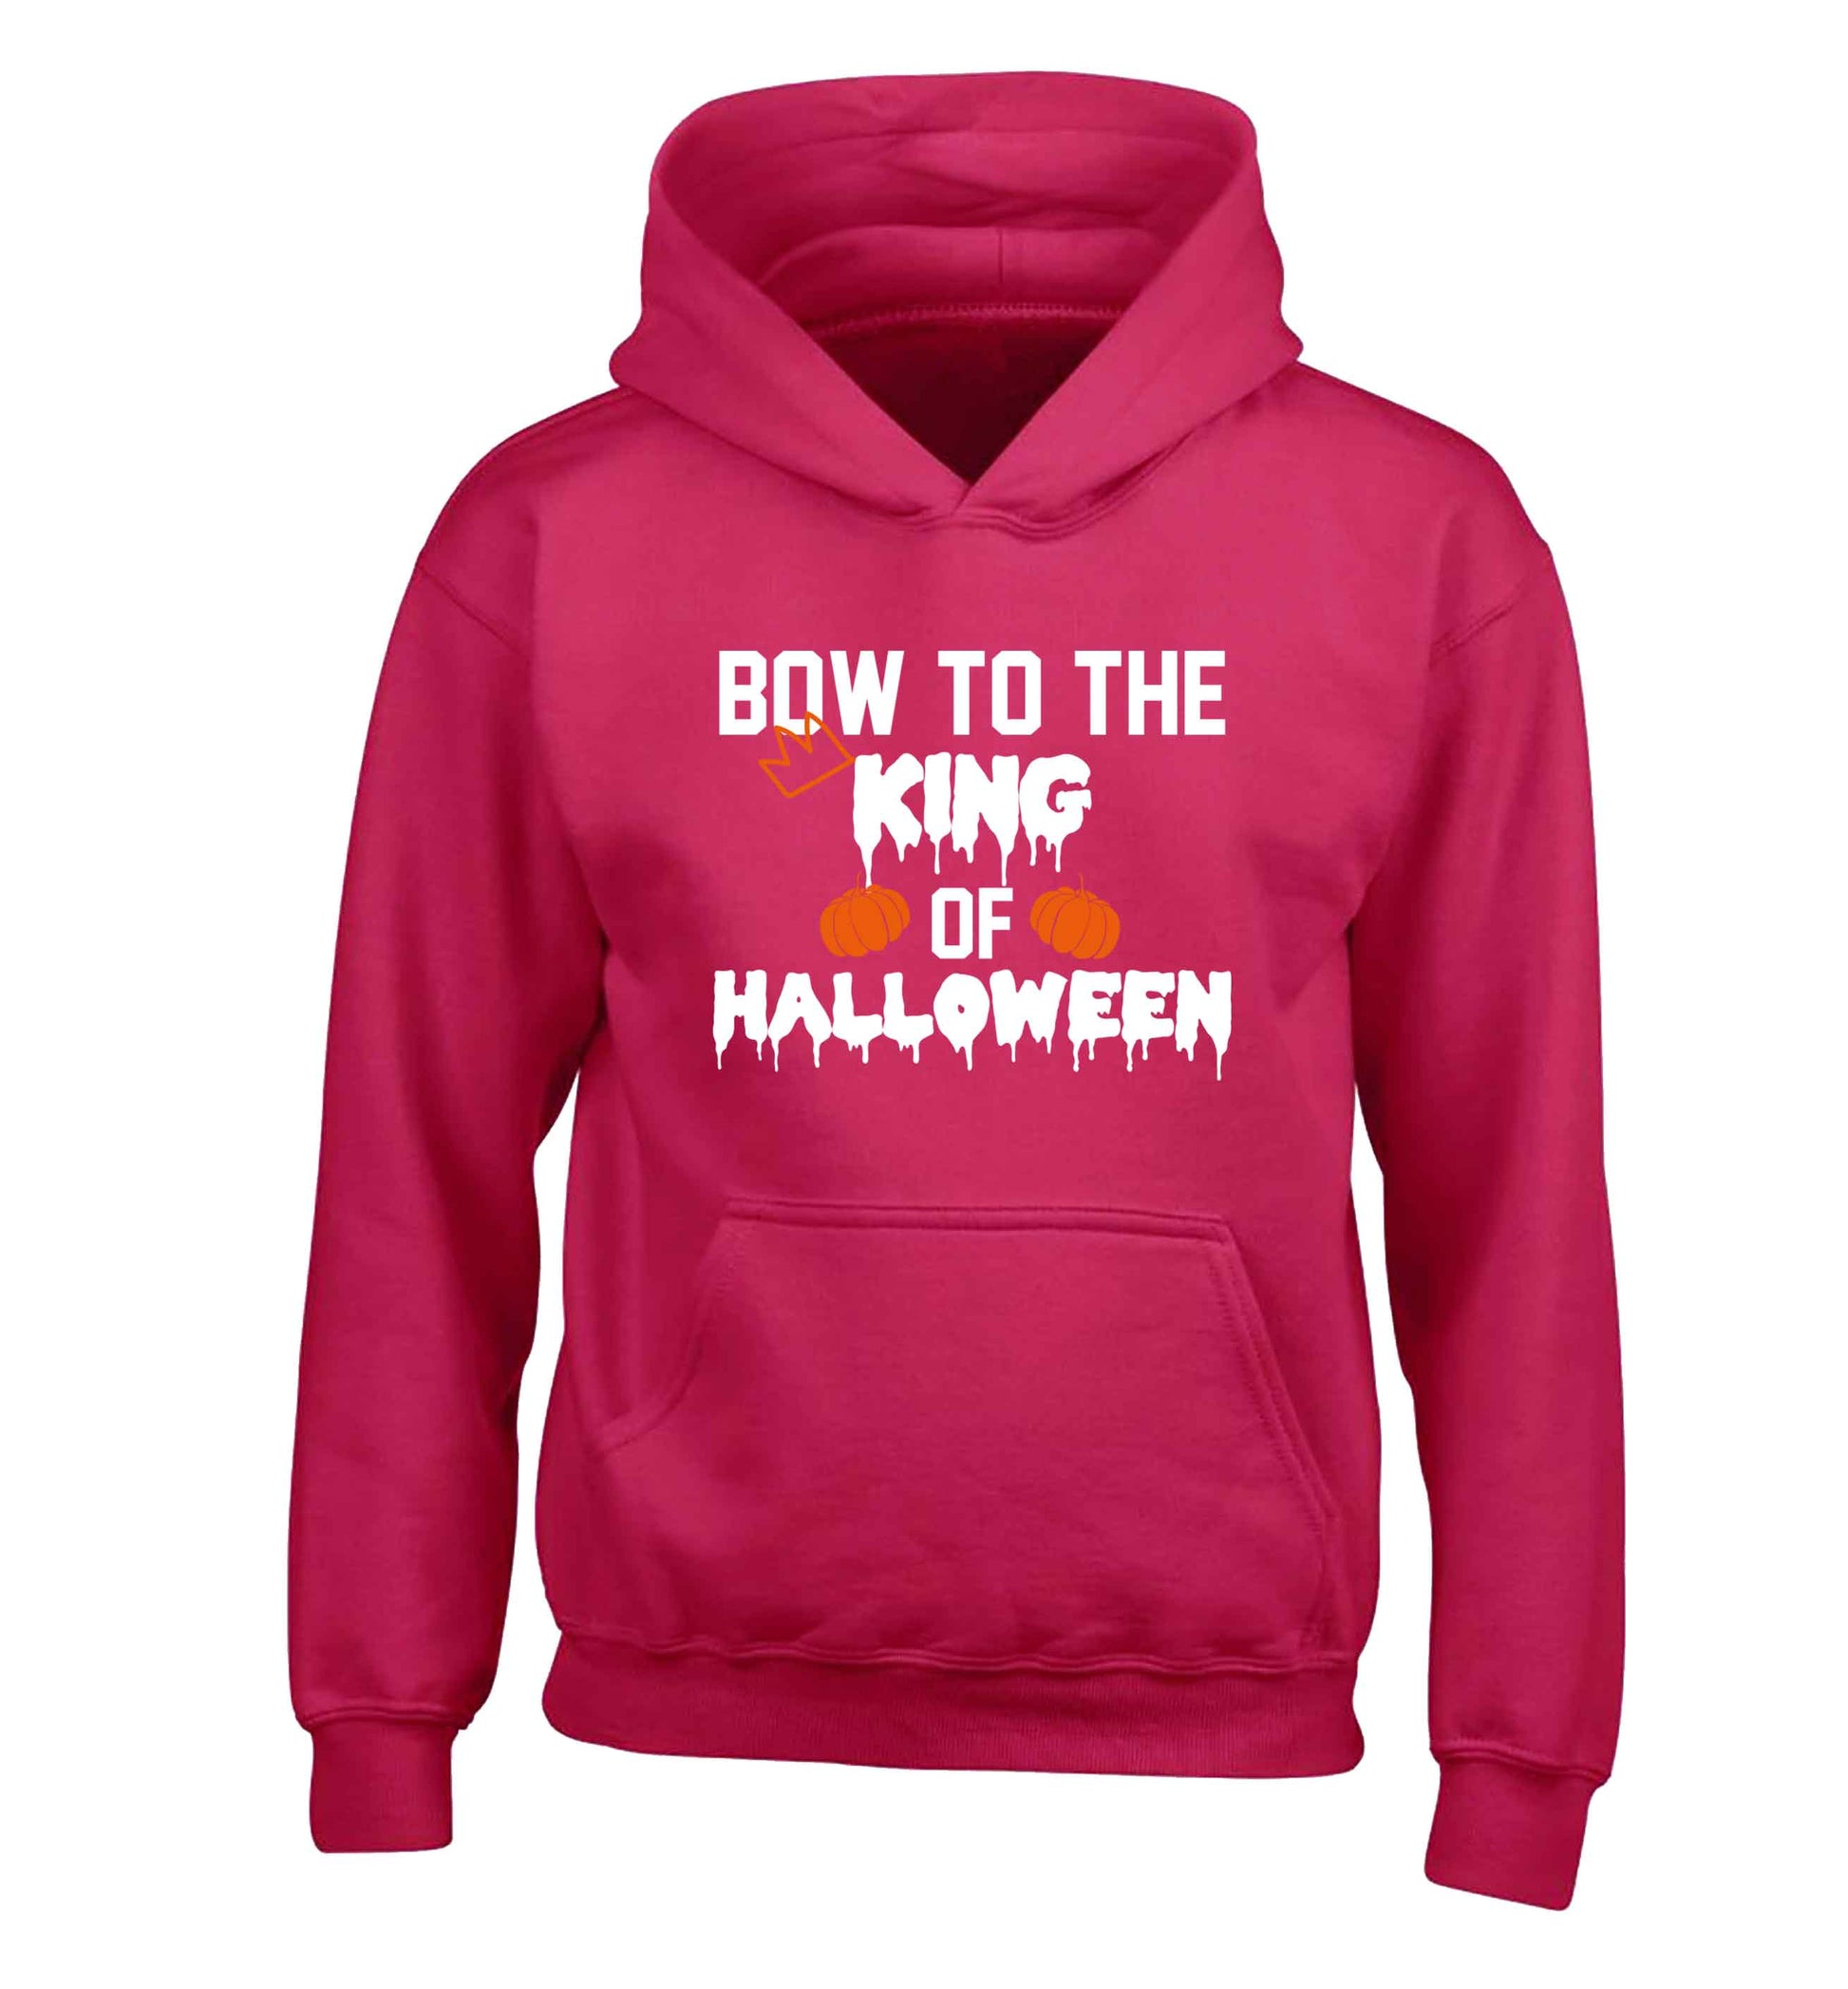 Bow to the King of halloween children's pink hoodie 12-13 Years